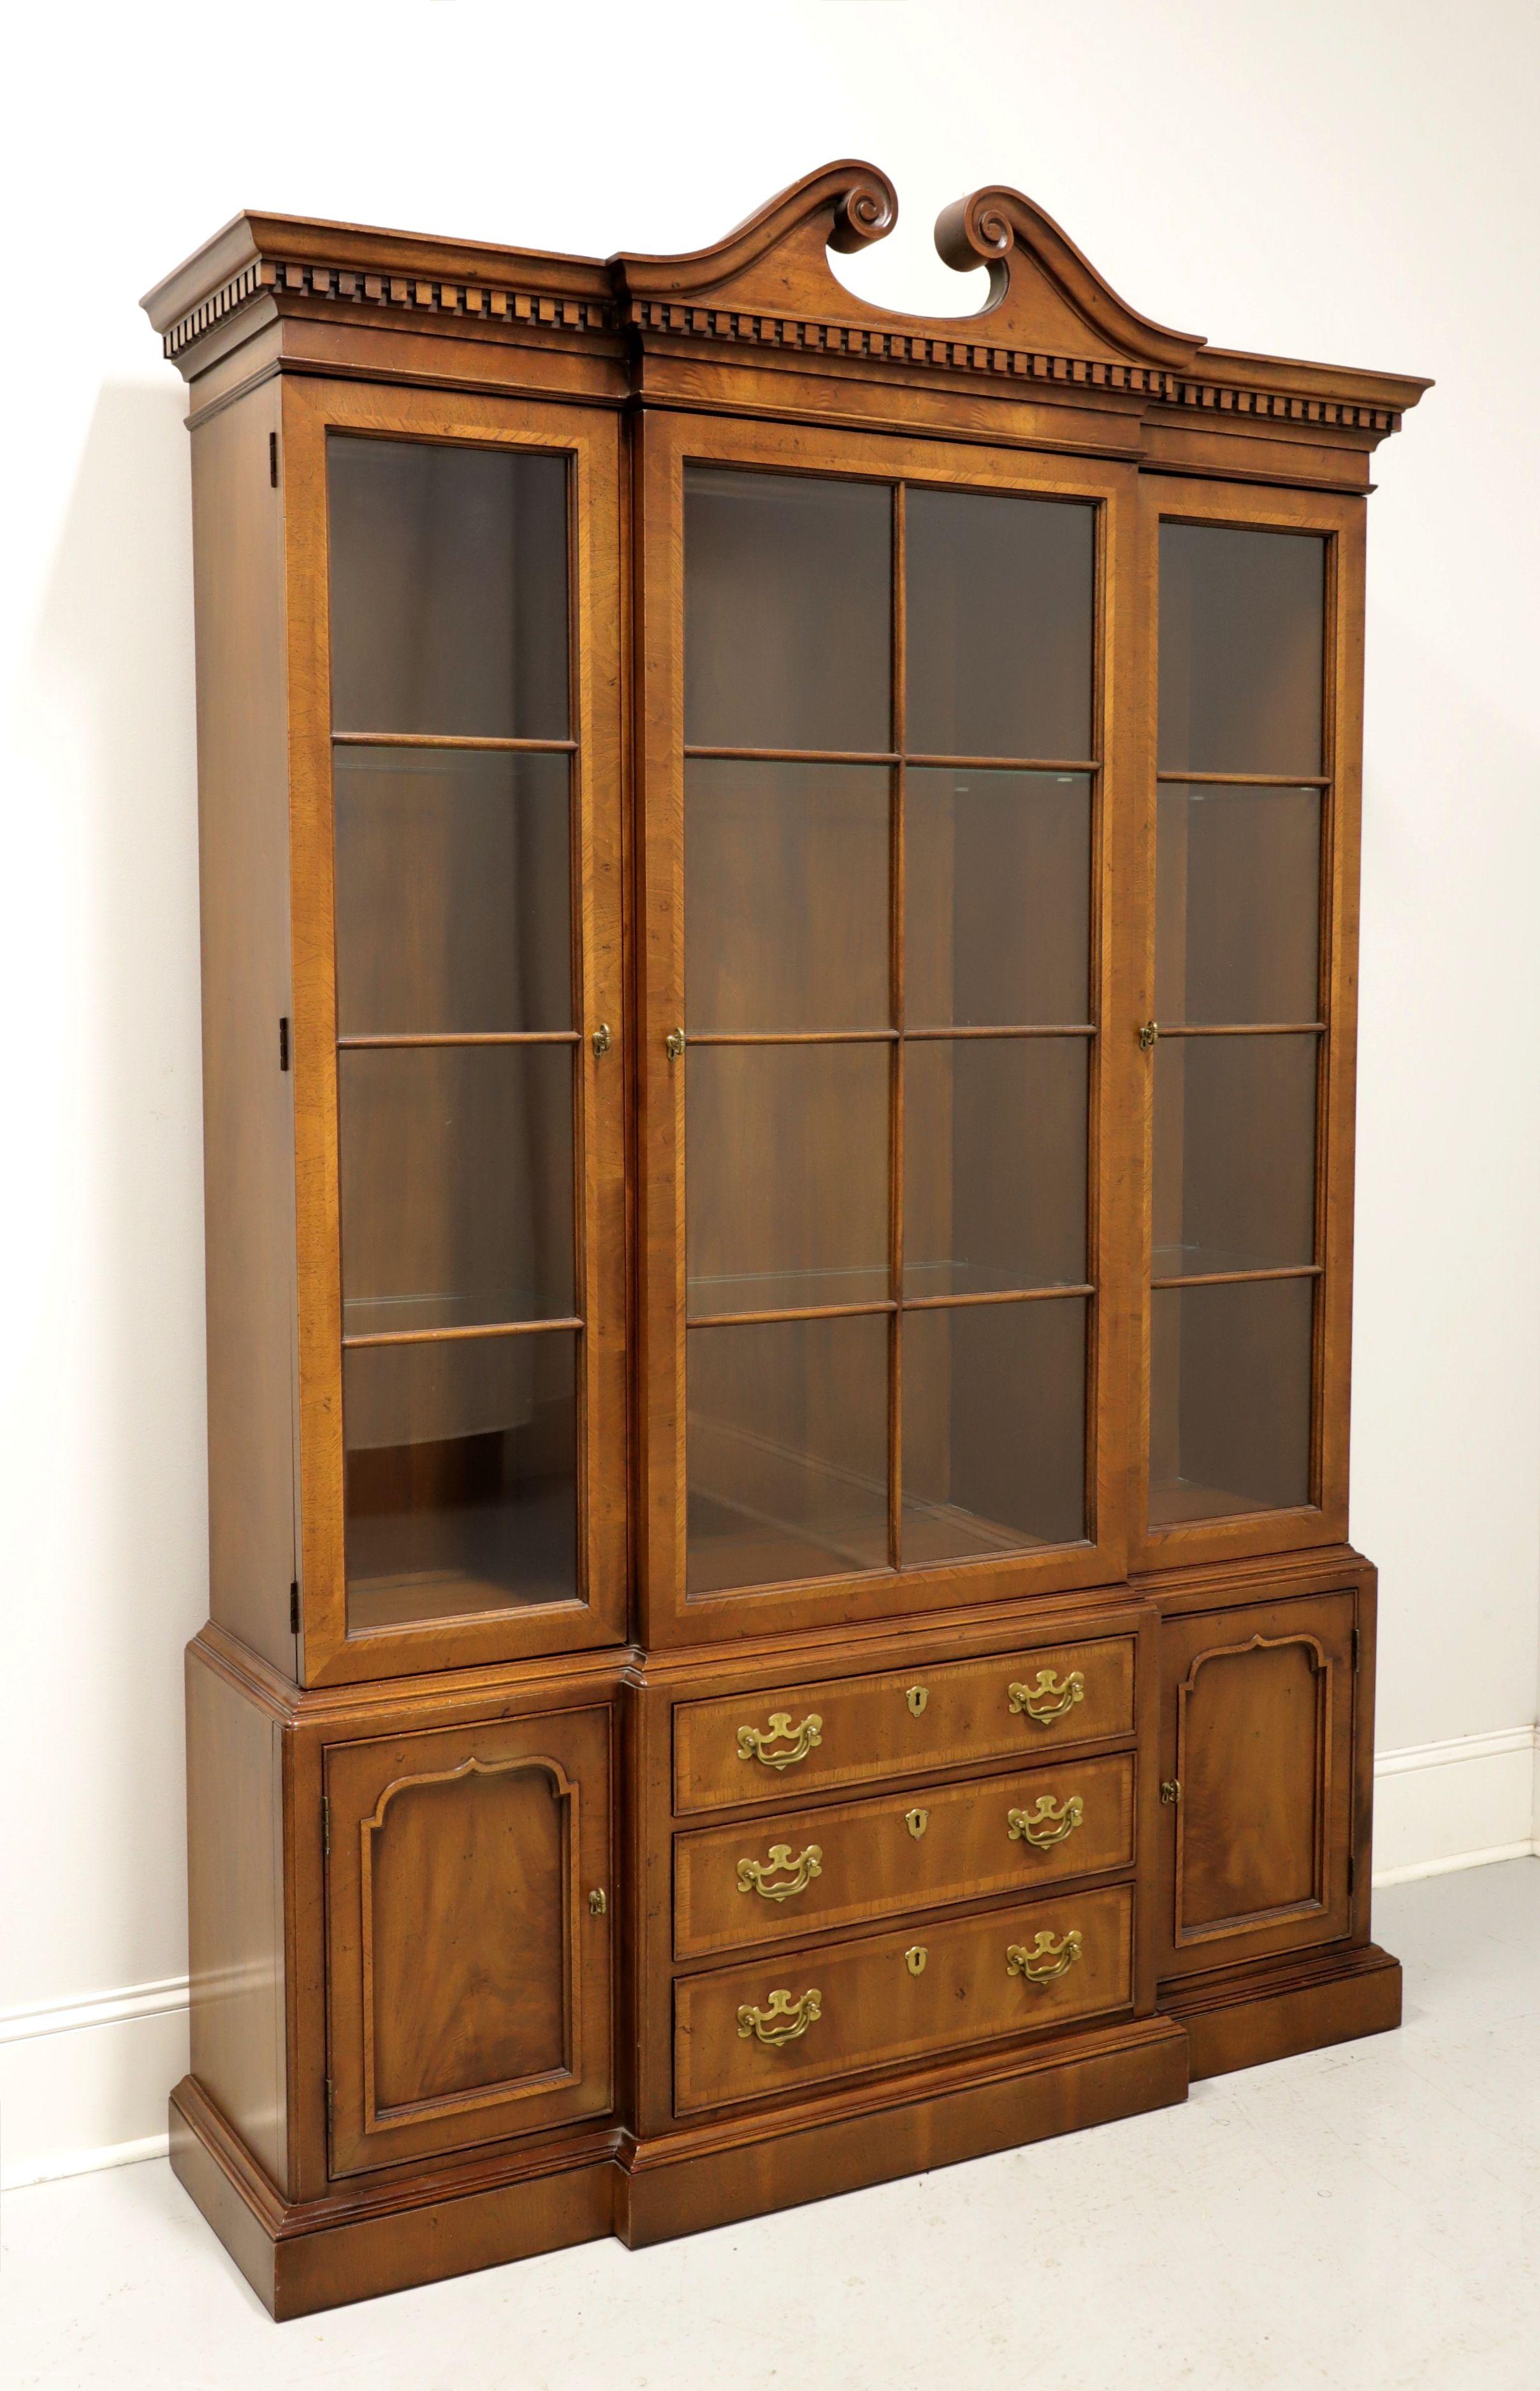 A Traditional style breakfront china cabinet by Henredon, from their 18th Century Portfolio. Walnut with banded drawer fronts and brass hardware. Top cabinet has three separate areas, each area has a paned glass door, three adjustable plate grooved